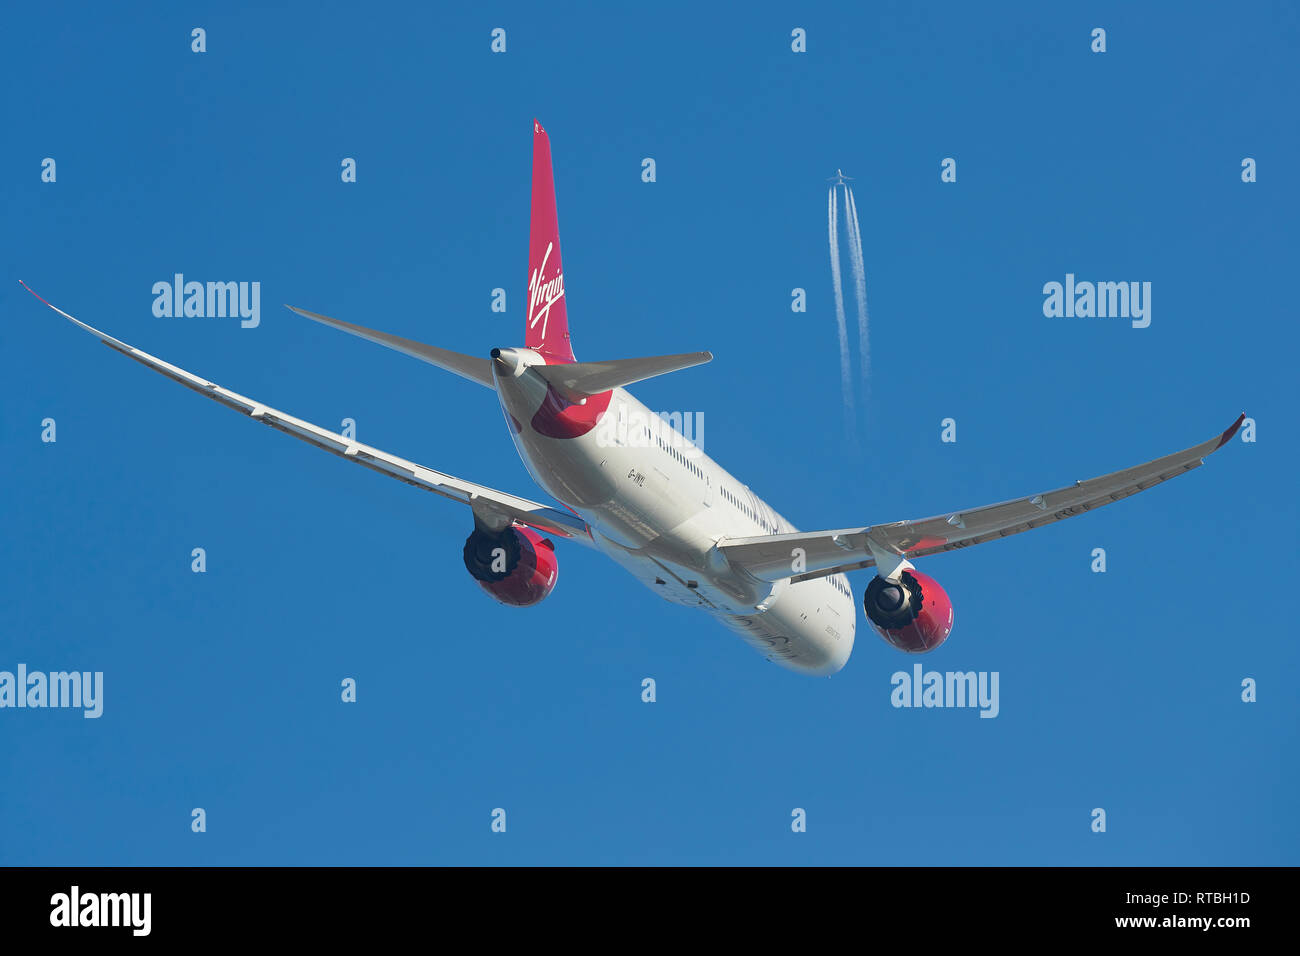 A Virgin Atlantic Boeing 787 Dreamliner Climbing Into Clear Blue Skies, A High Flying Boeing 747 Contrailing Overhead. Stock Photo